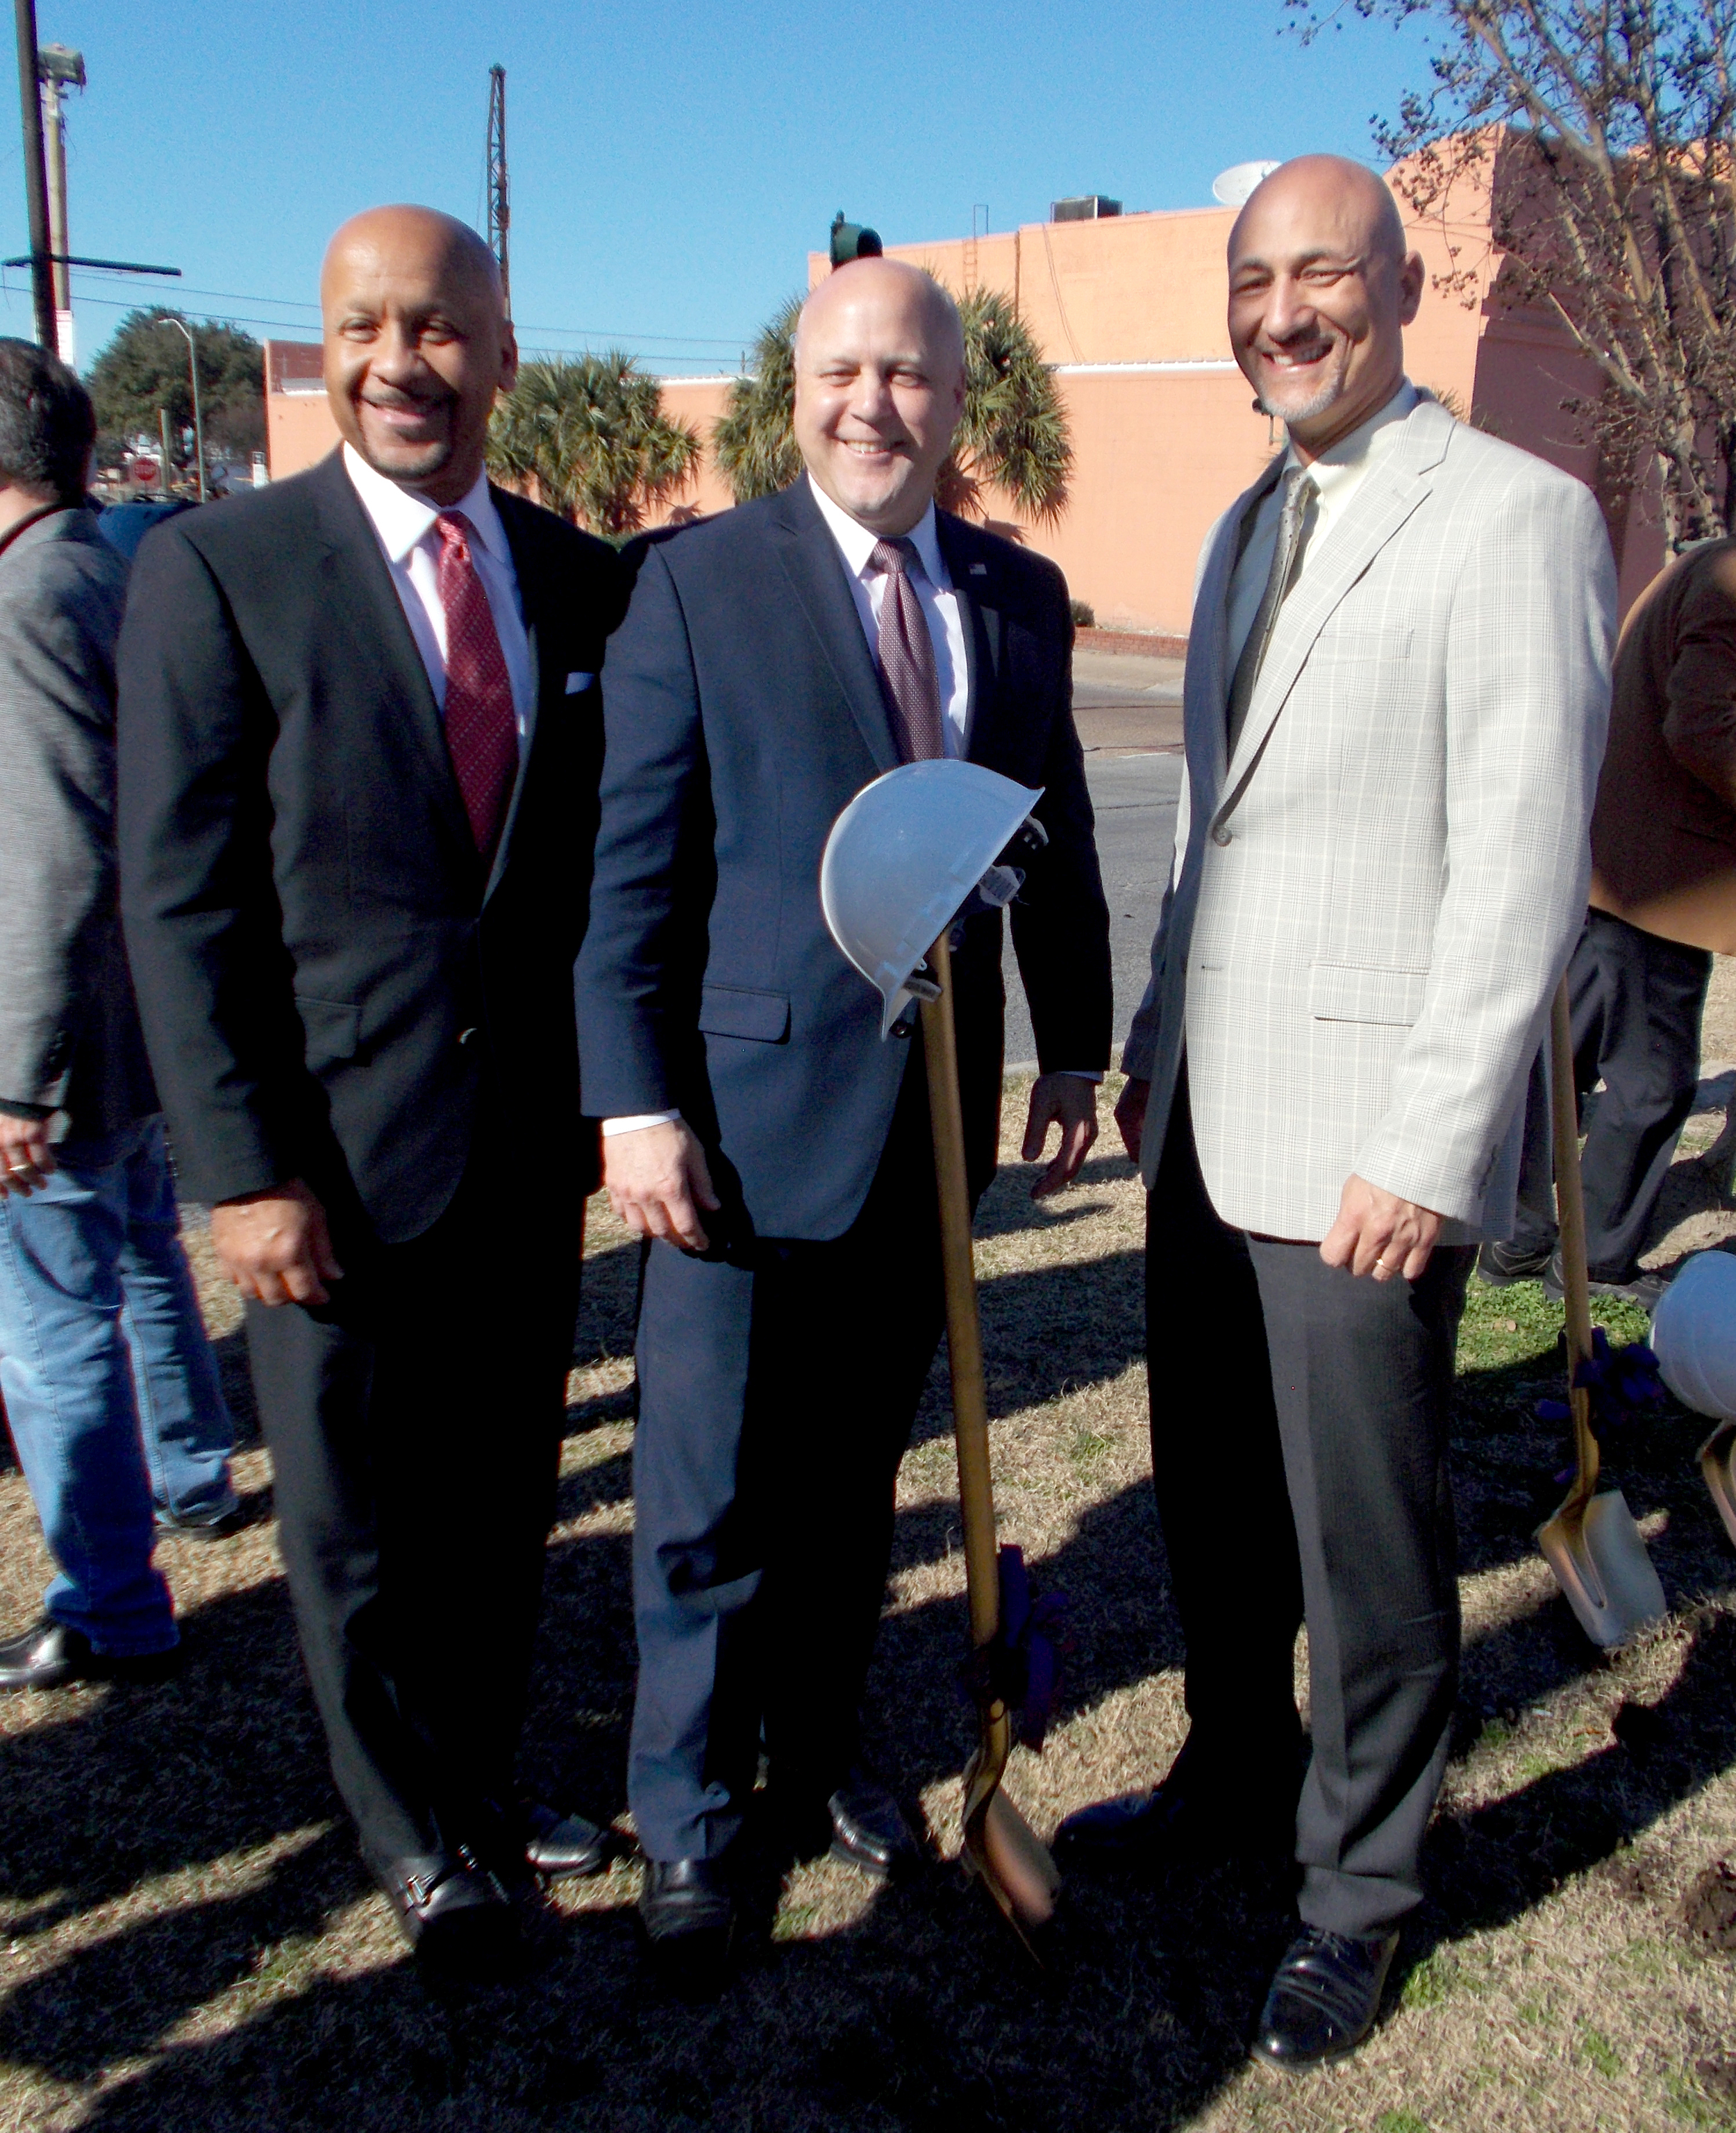  Regional Transit Authority CEO Justin Augustine, from left, New Orleans Mayor Mitch Landrieu, and Infinity Engineering Consultants, LLC Principal Raoul V. Chauvin, III celebrate the ground breaking of the Rampart Streetcar Line at the ceremony on Ja